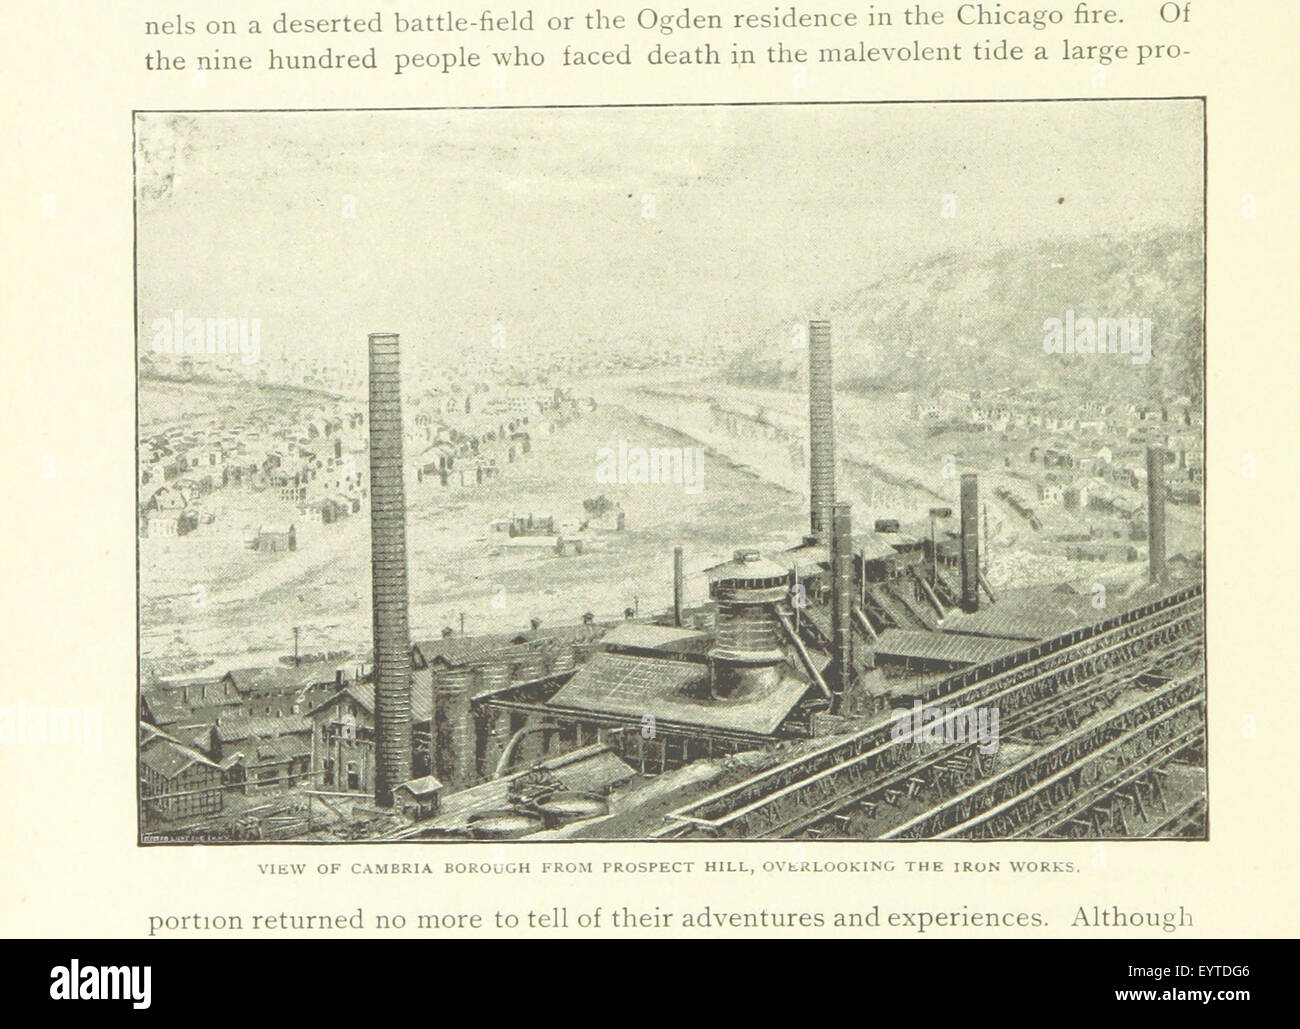 Image taken from page 106 of 'The Story of Johnstown ... Illustrated, etc' Image taken from page 106 of 'The Story of Johnstown Stock Photo